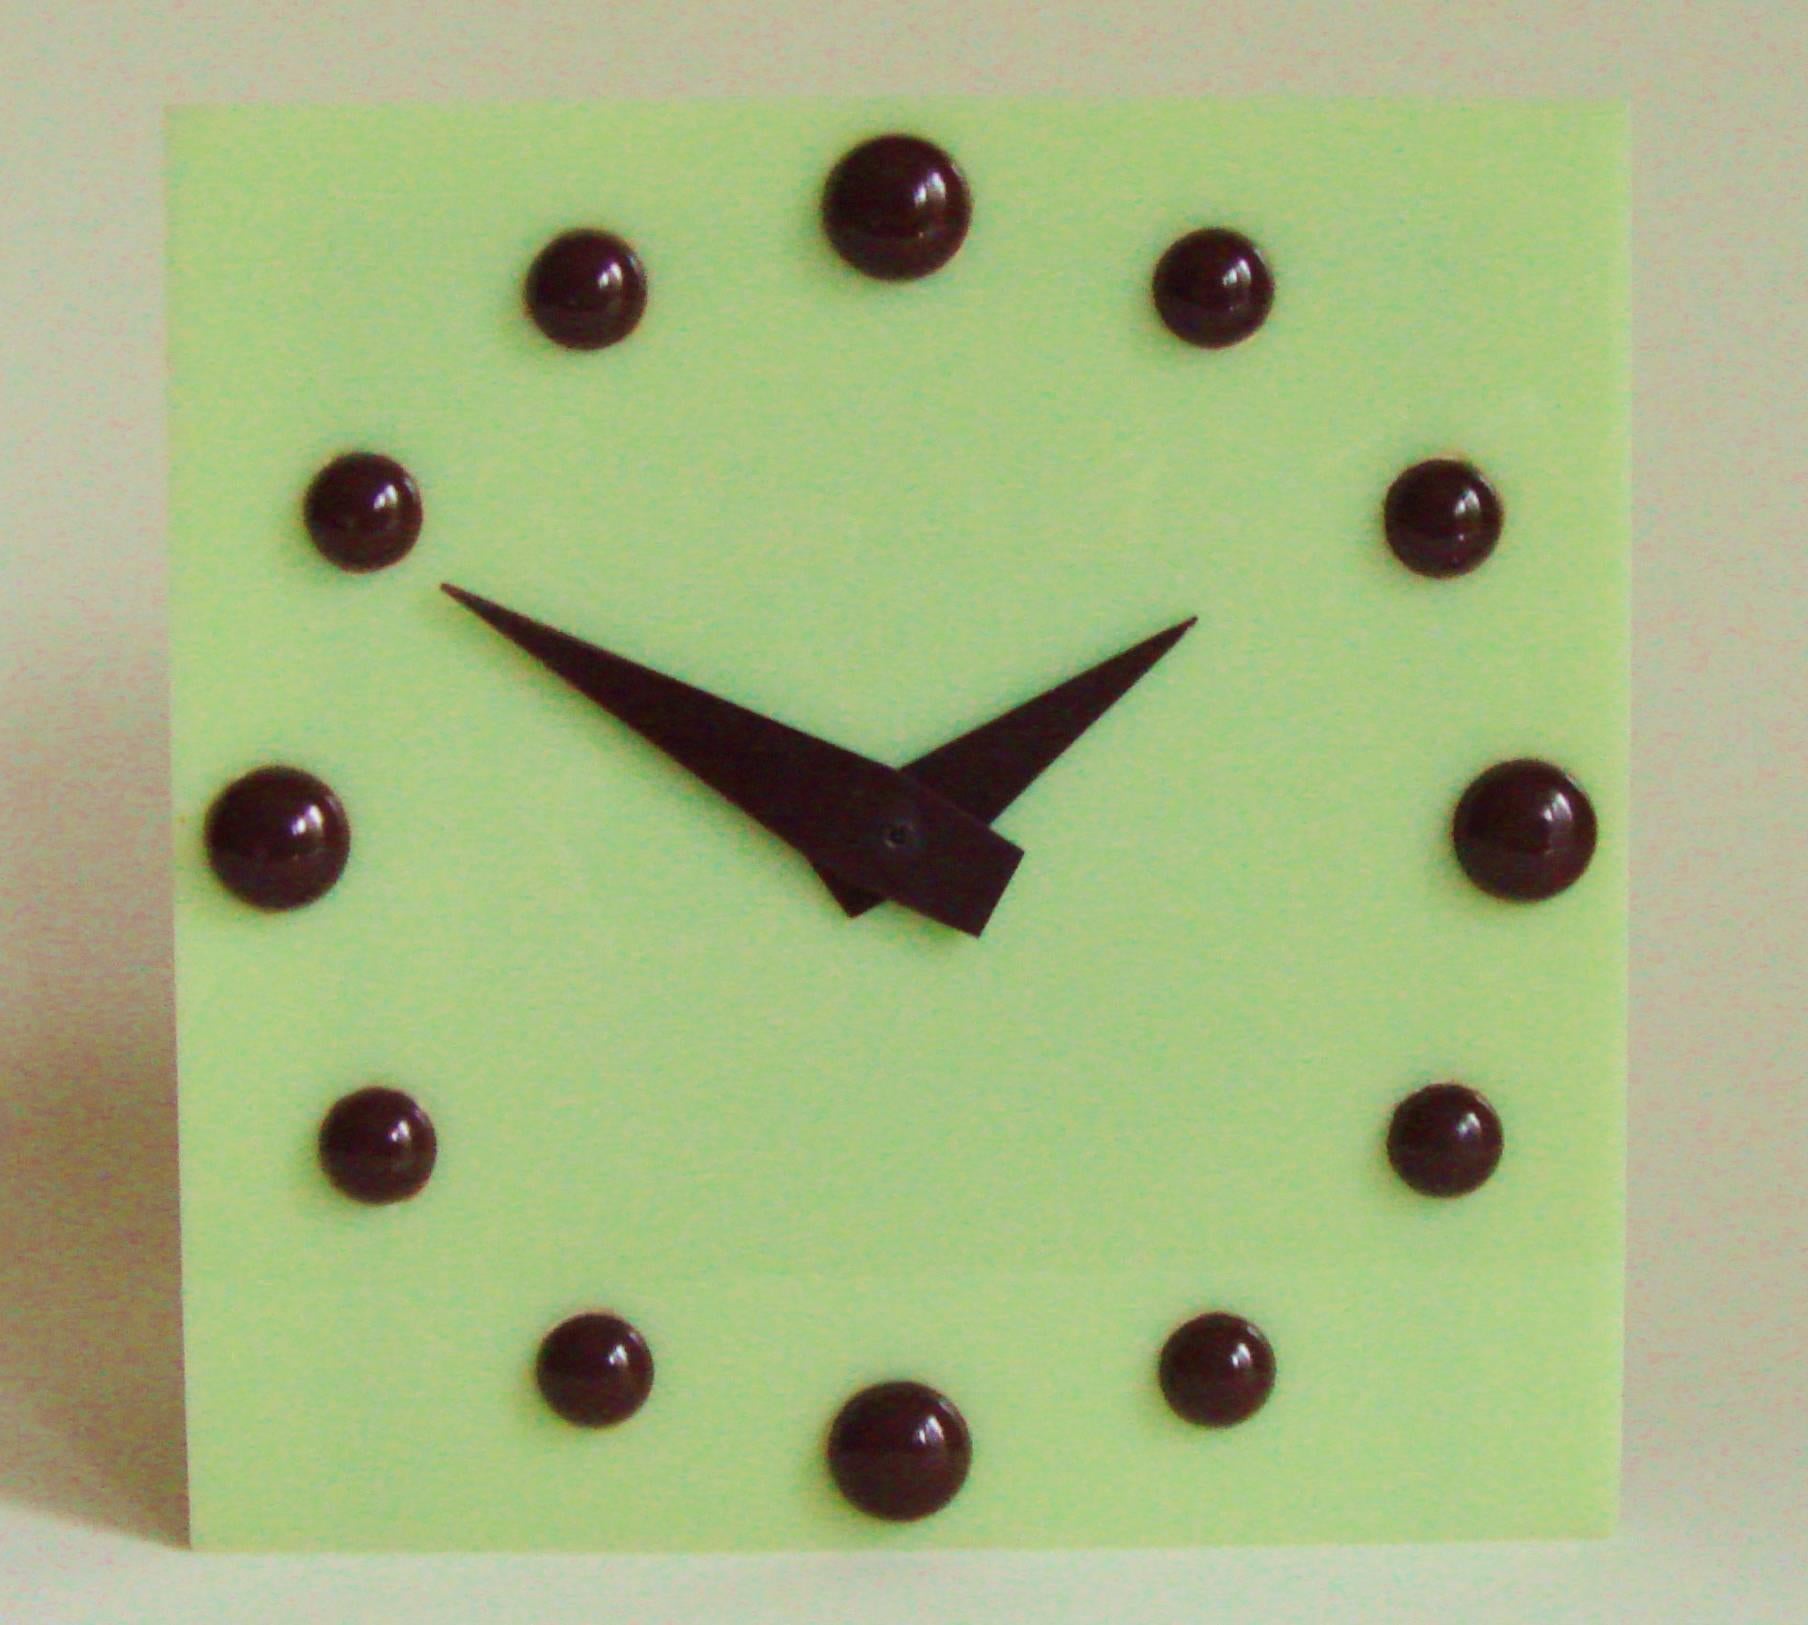 This beautiful and stylishly designed English pistachio Lucite and brown Bakelite electric table clock is stunning in its simplicity. The clock face is a square of solid pistachio Lucite, the numerals are represented by 12 hemispheres of rich